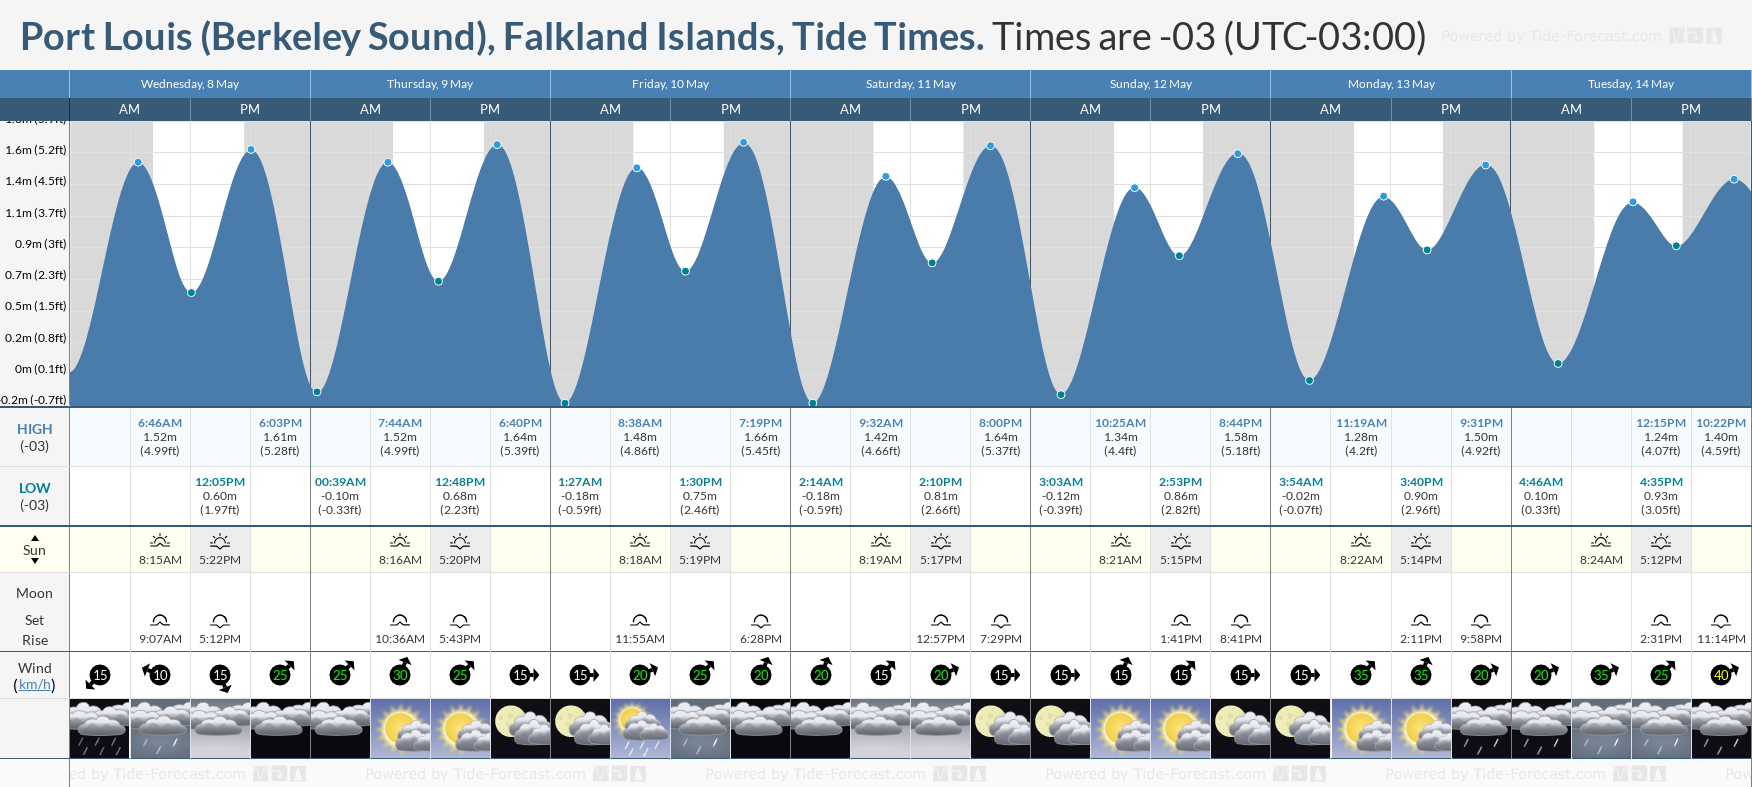 Port Louis (Berkeley Sound), Falkland Islands Tide Chart including high and low tide tide times for the next 7 days